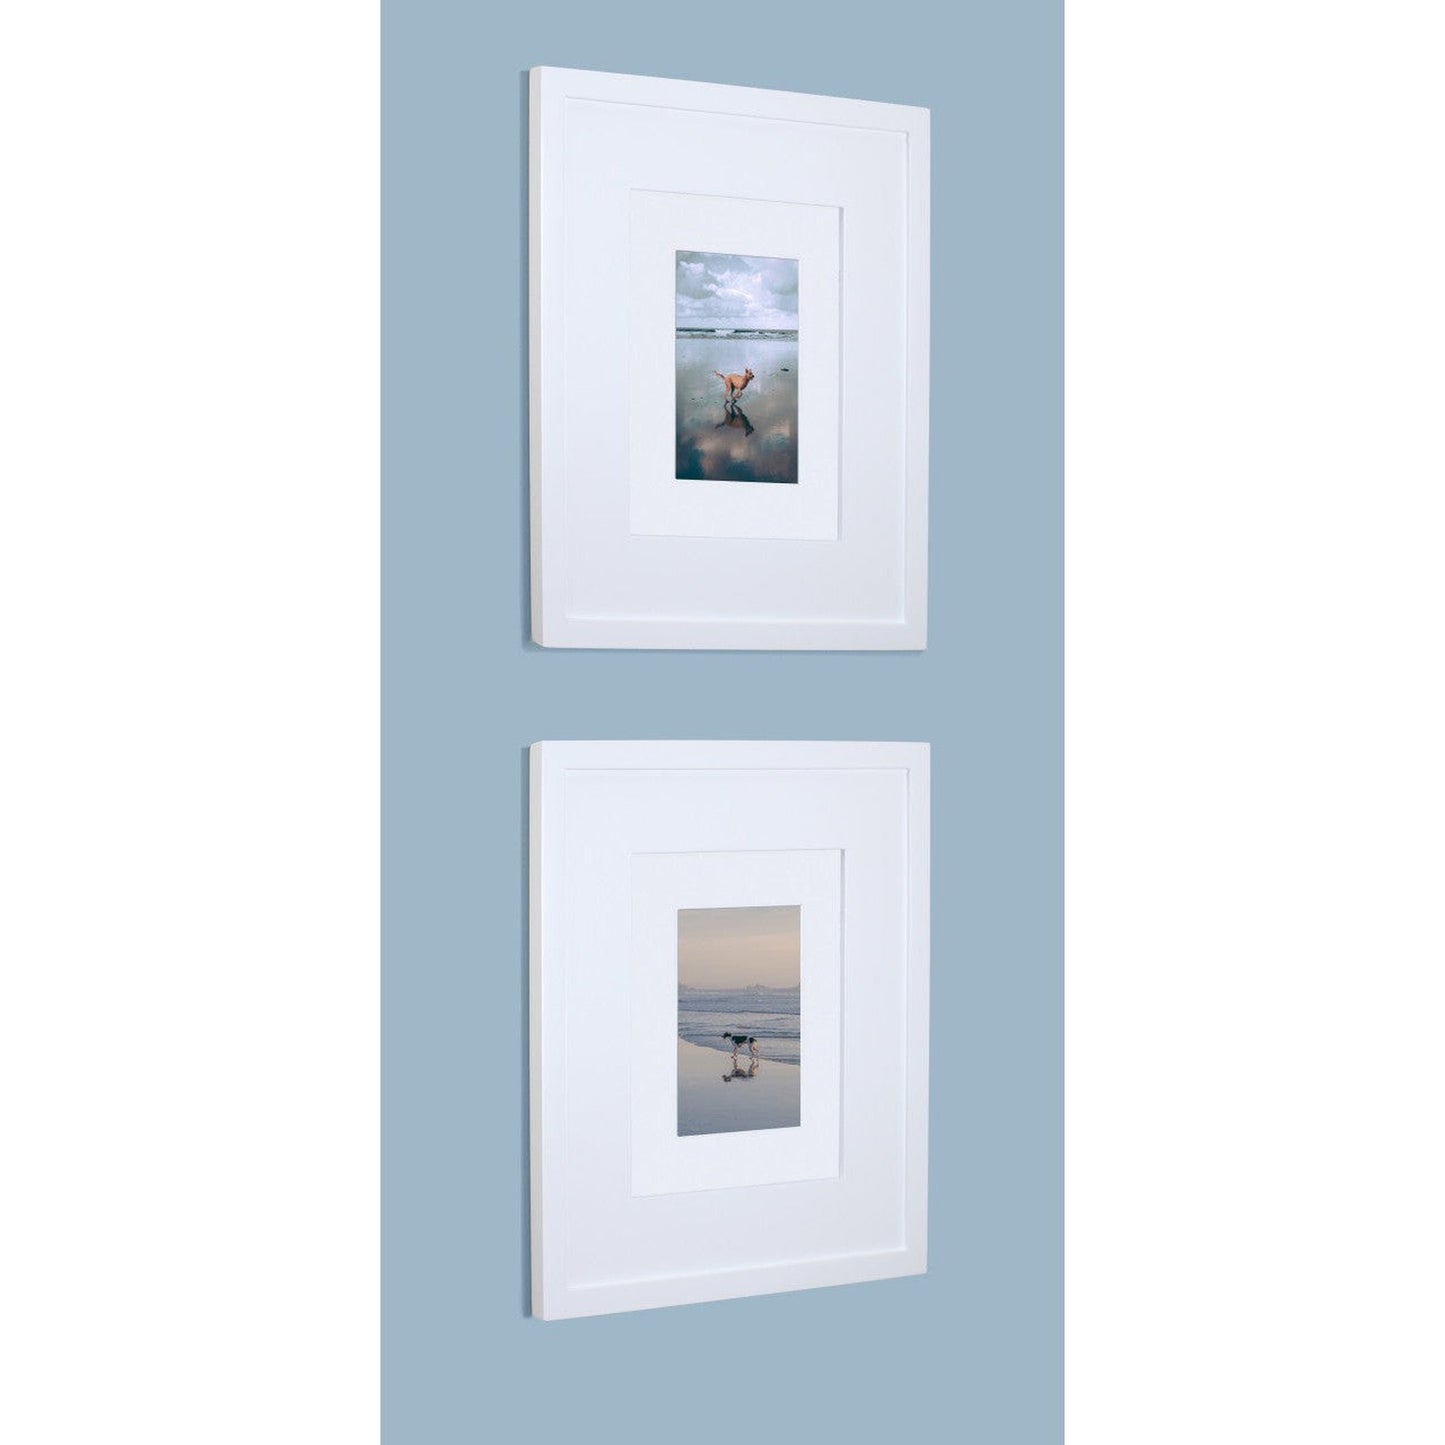 Fox Hollow Furnishings 11" x 14" White Compact Contemporary Raised Edge Standard Depth Recessed Picture Frame Medicine Cabinet With Mirror and White Matting